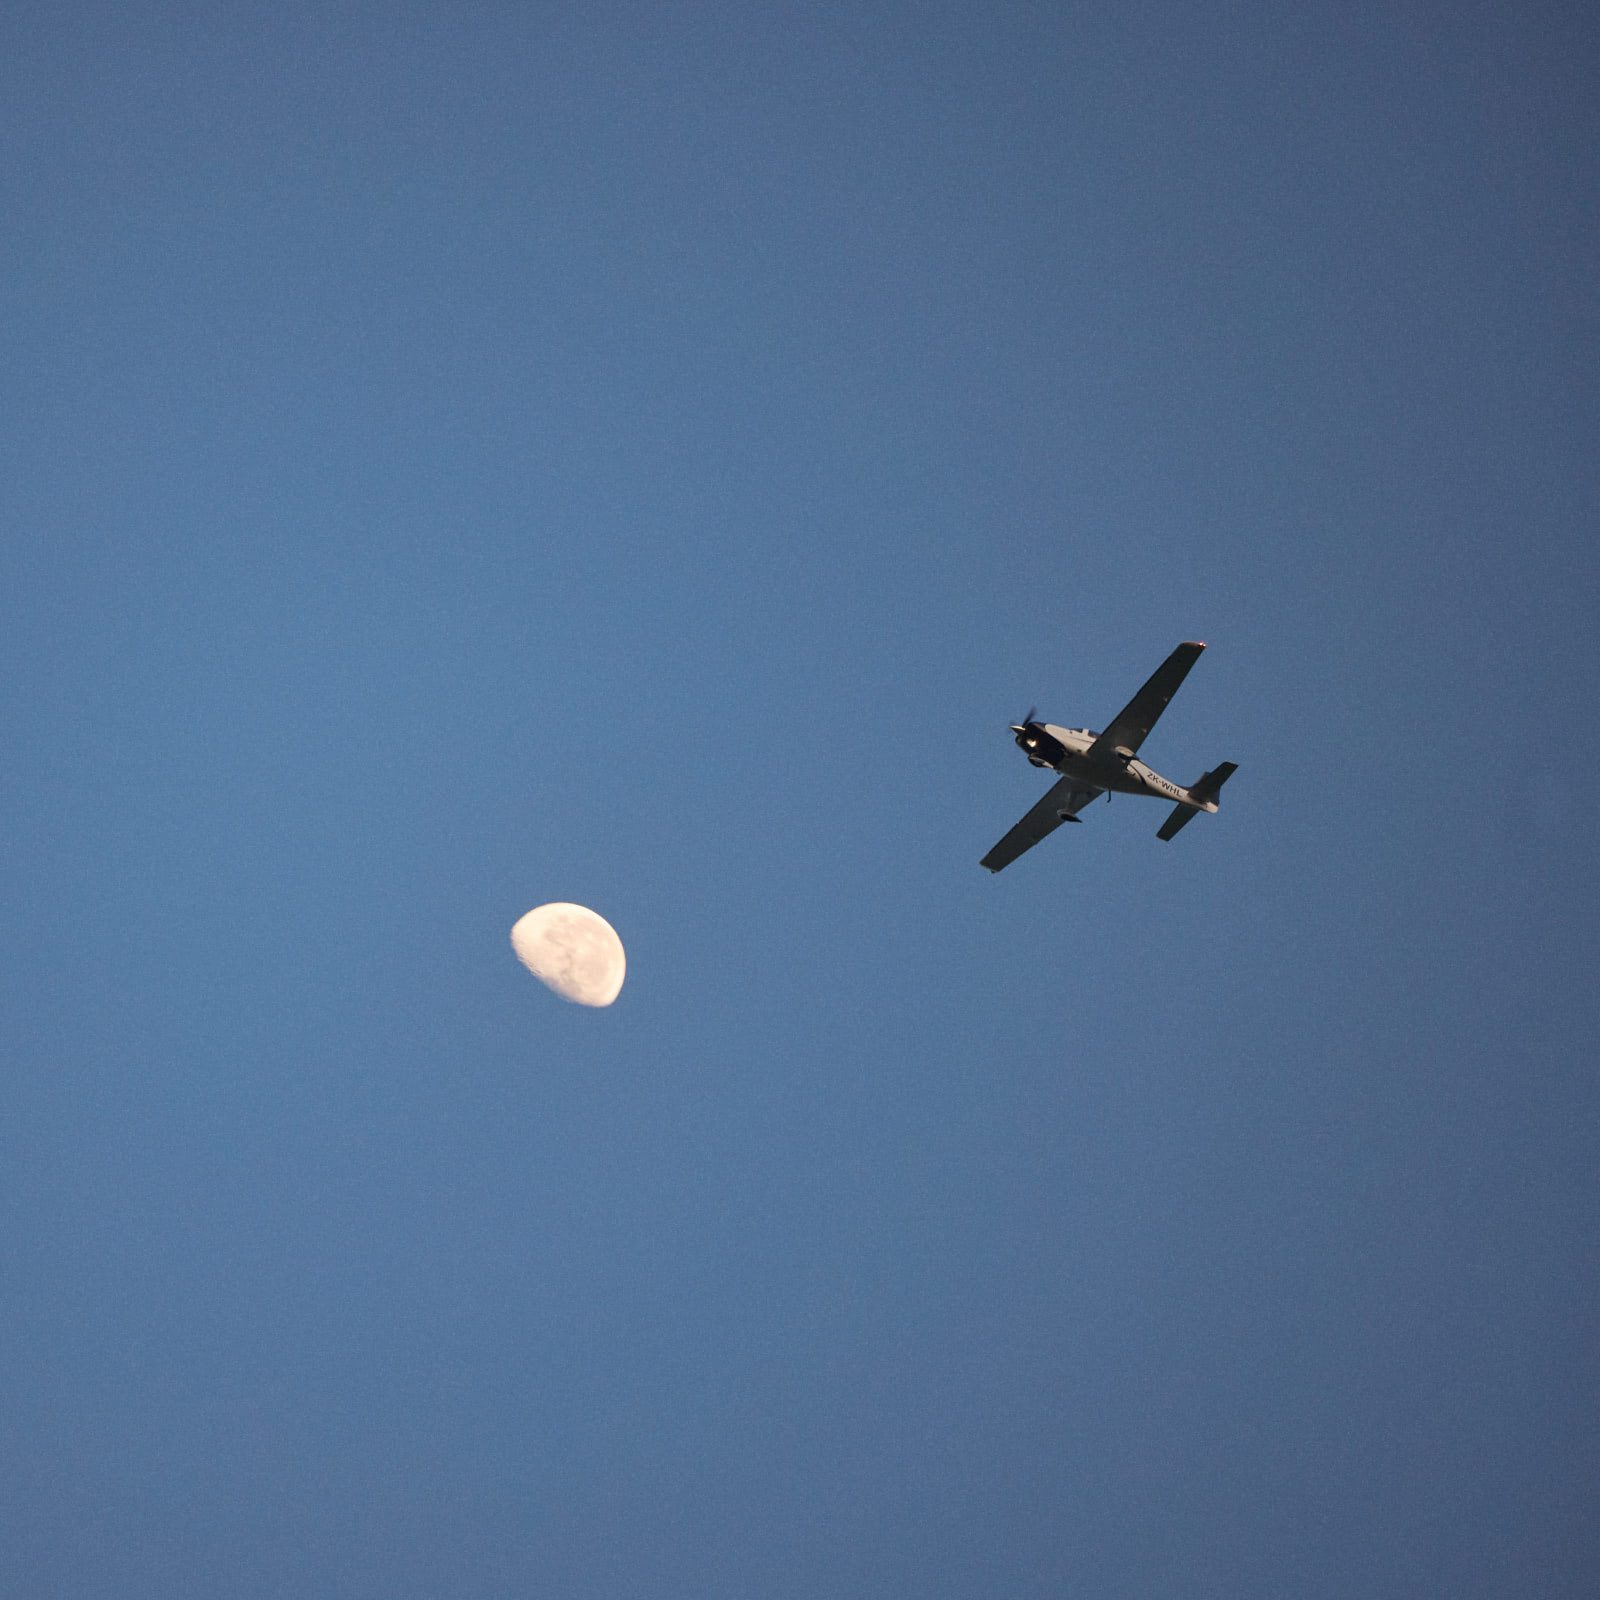 Plane flying with clear blue skies and a half moon